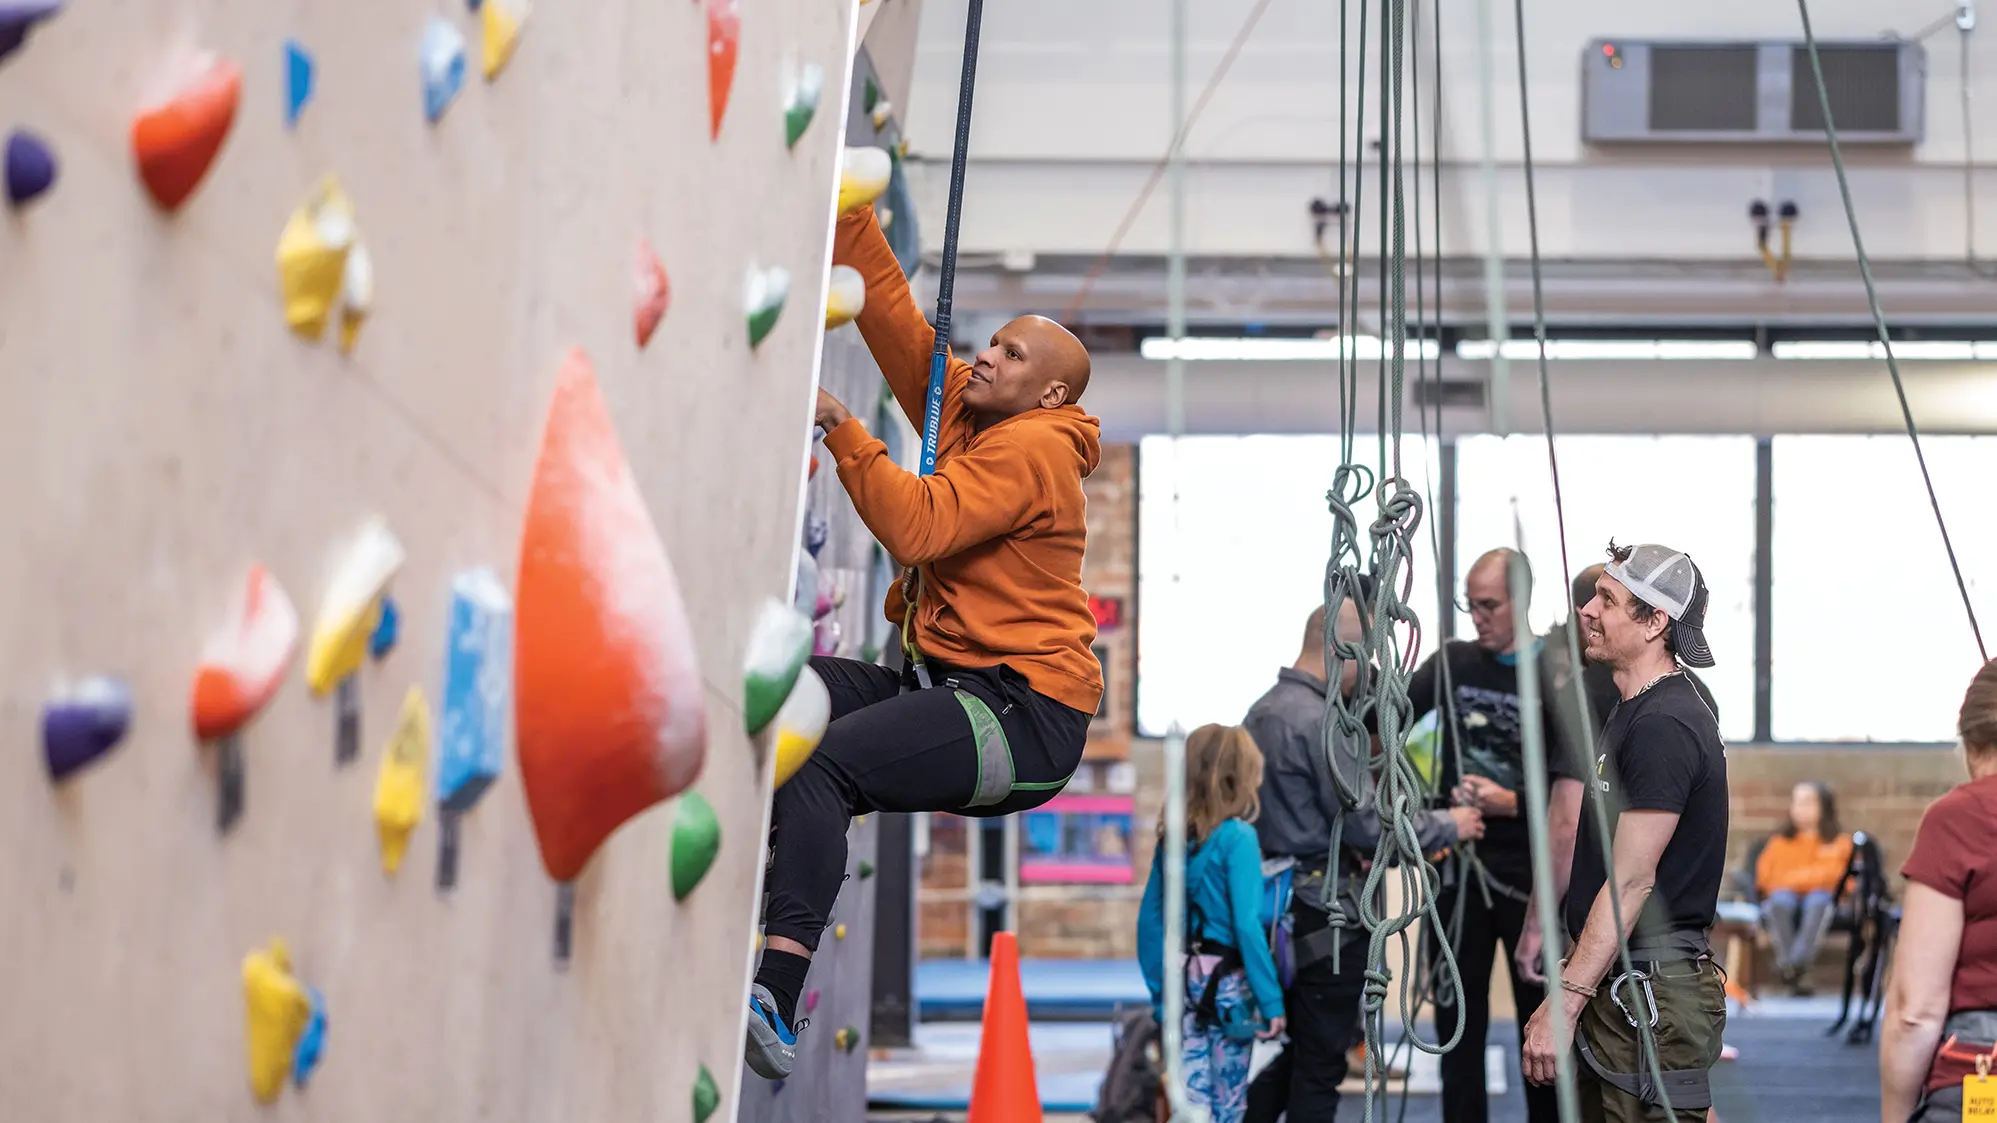 Wearing sweats and connected to a safety line, Ryan Shazier looks for the next handhold to continue ascending a climbing wall.